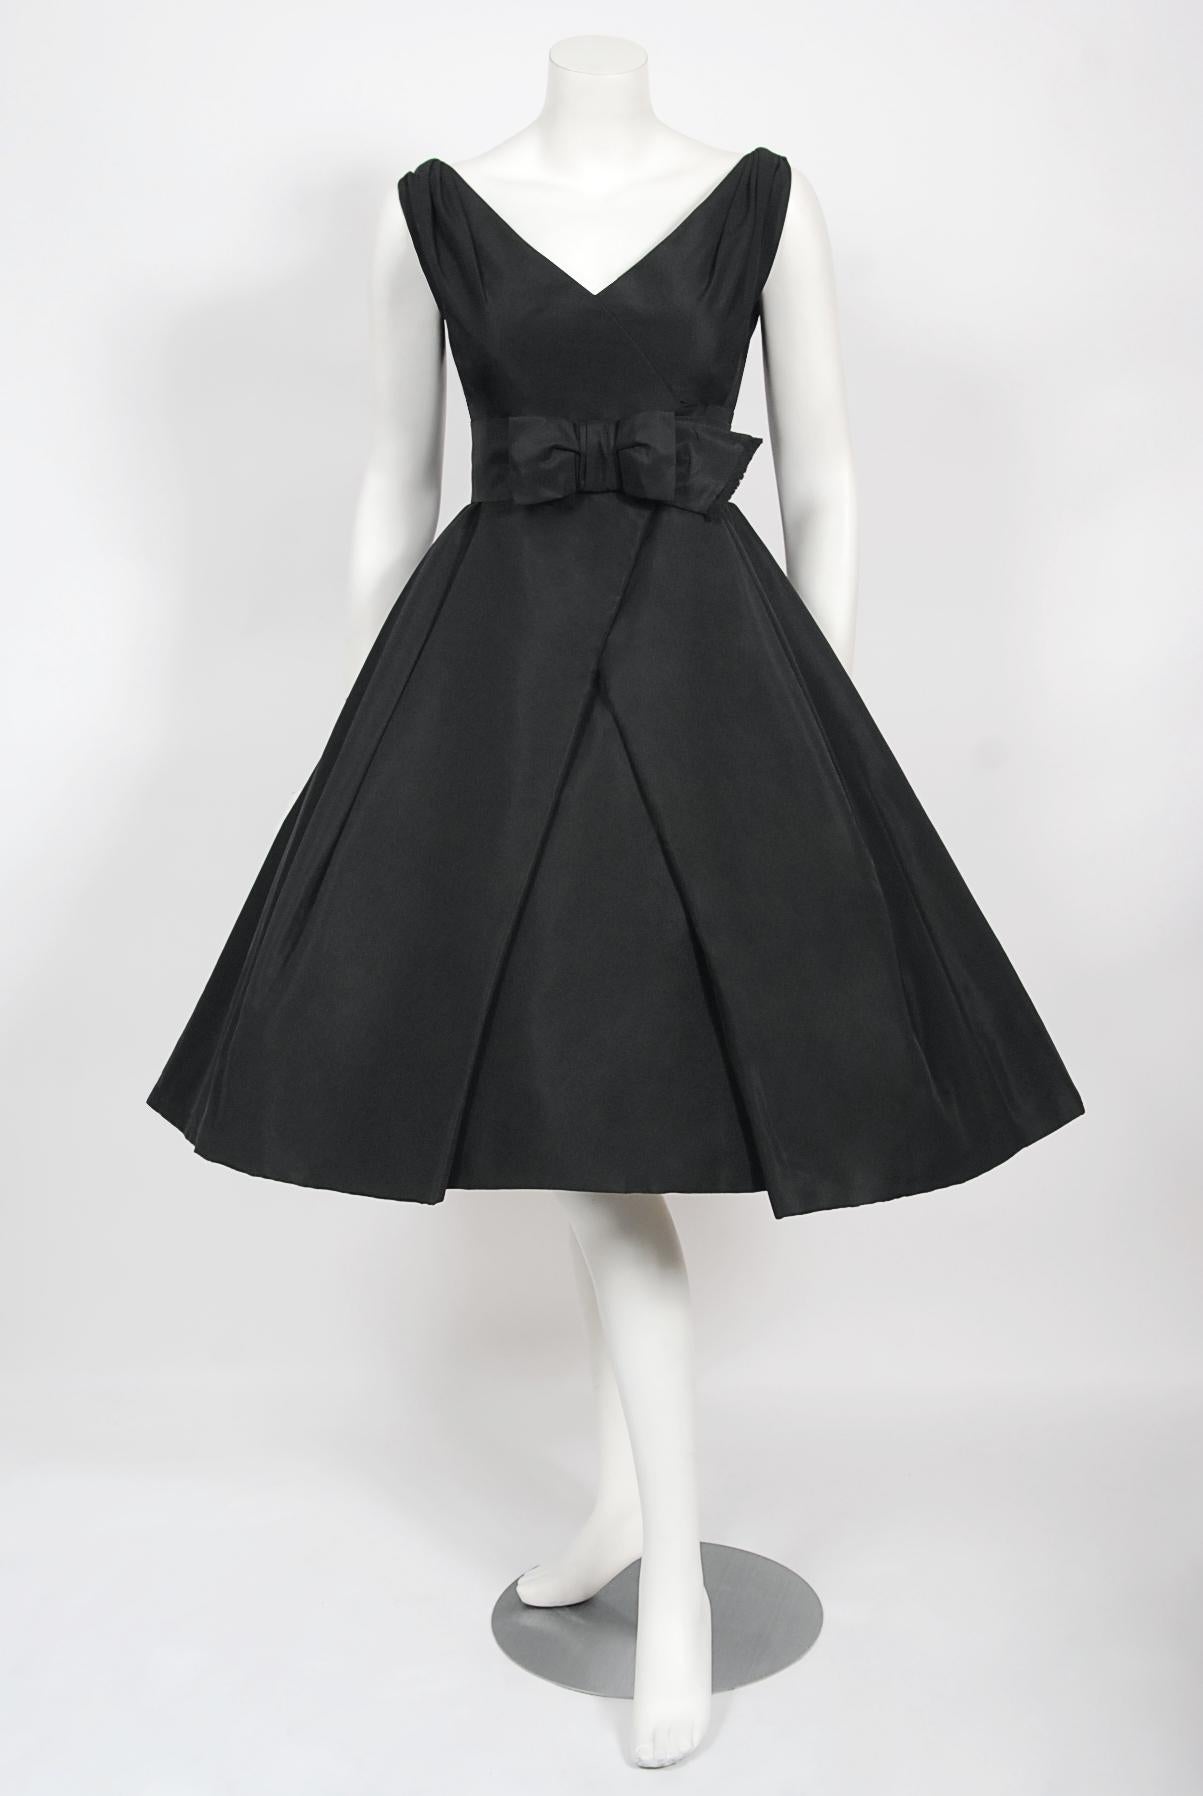 Vintage 1956 Christian Dior Haute Couture Documented Black Silk 'New Look' Dress 2